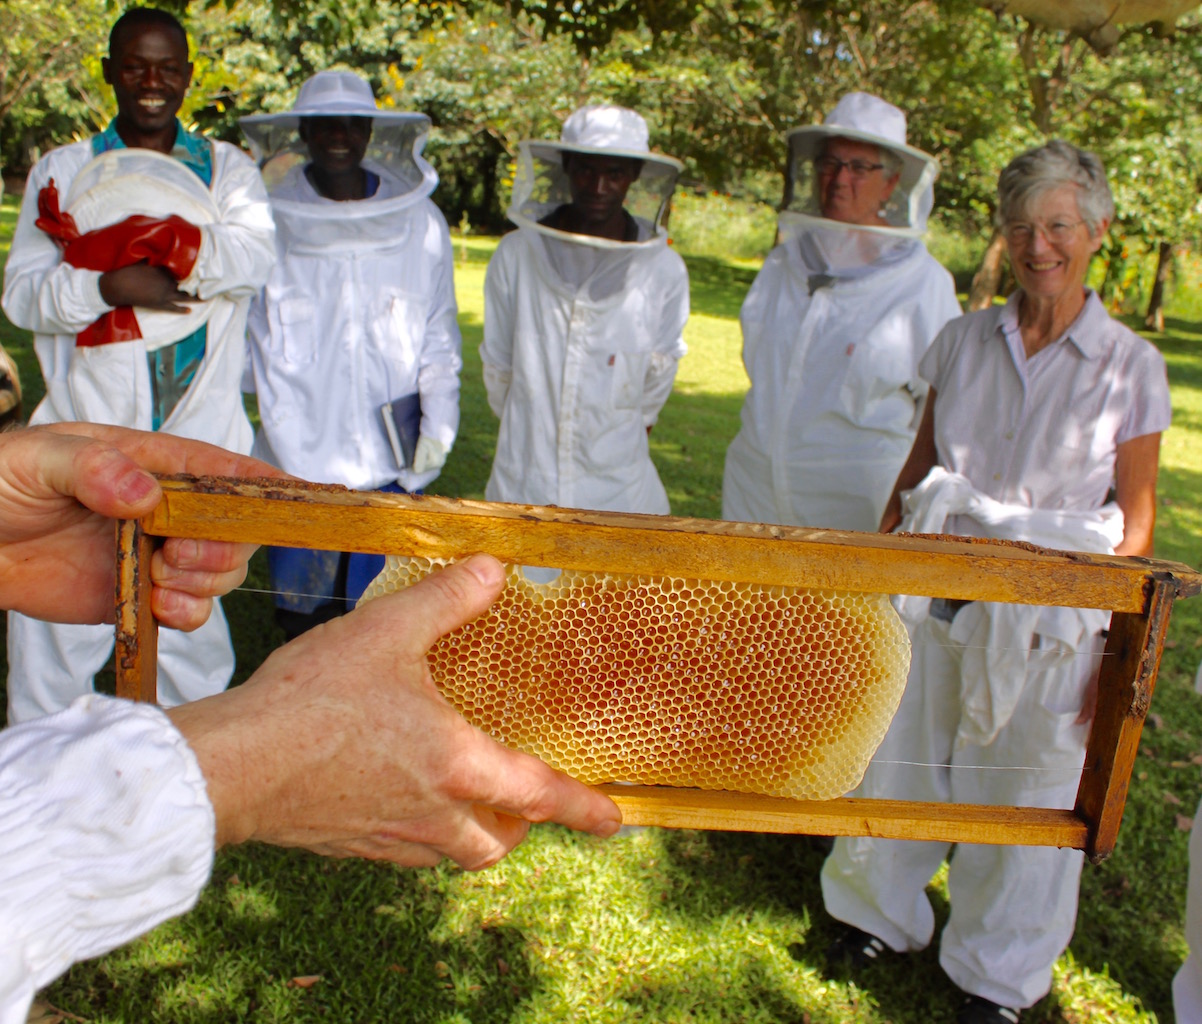 Bees - honey extracted from the hive as a demo